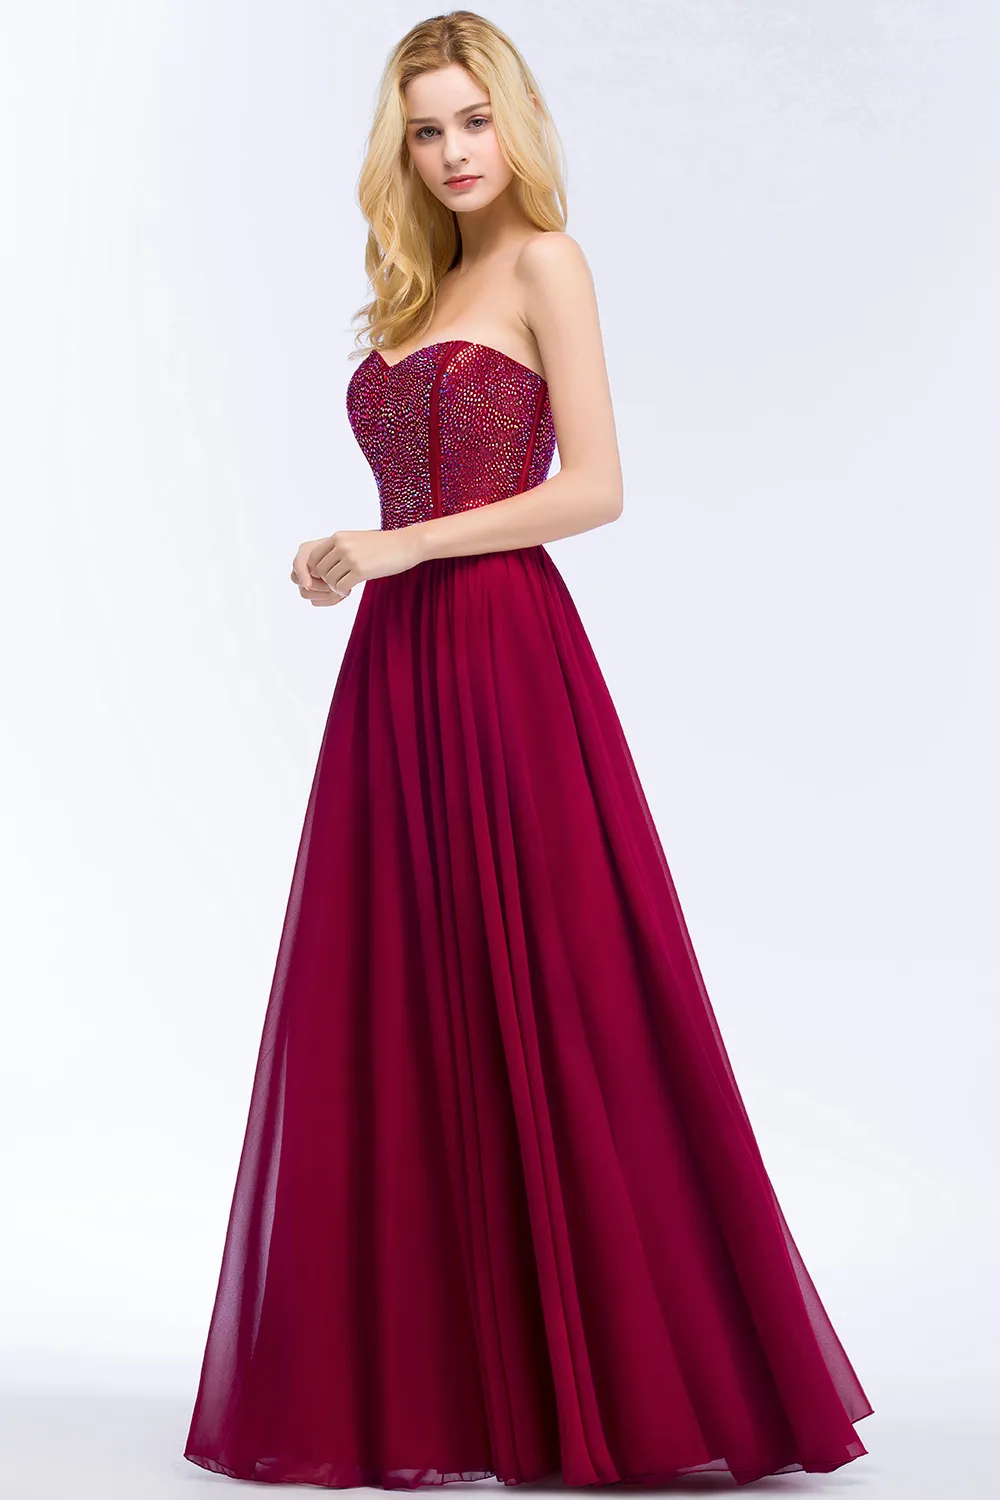 Beaded Chiffon Long Prom Dresses Real Image Sweetheart Beaded Stones Formal Party Evening Special Occasional Dresses CPS883